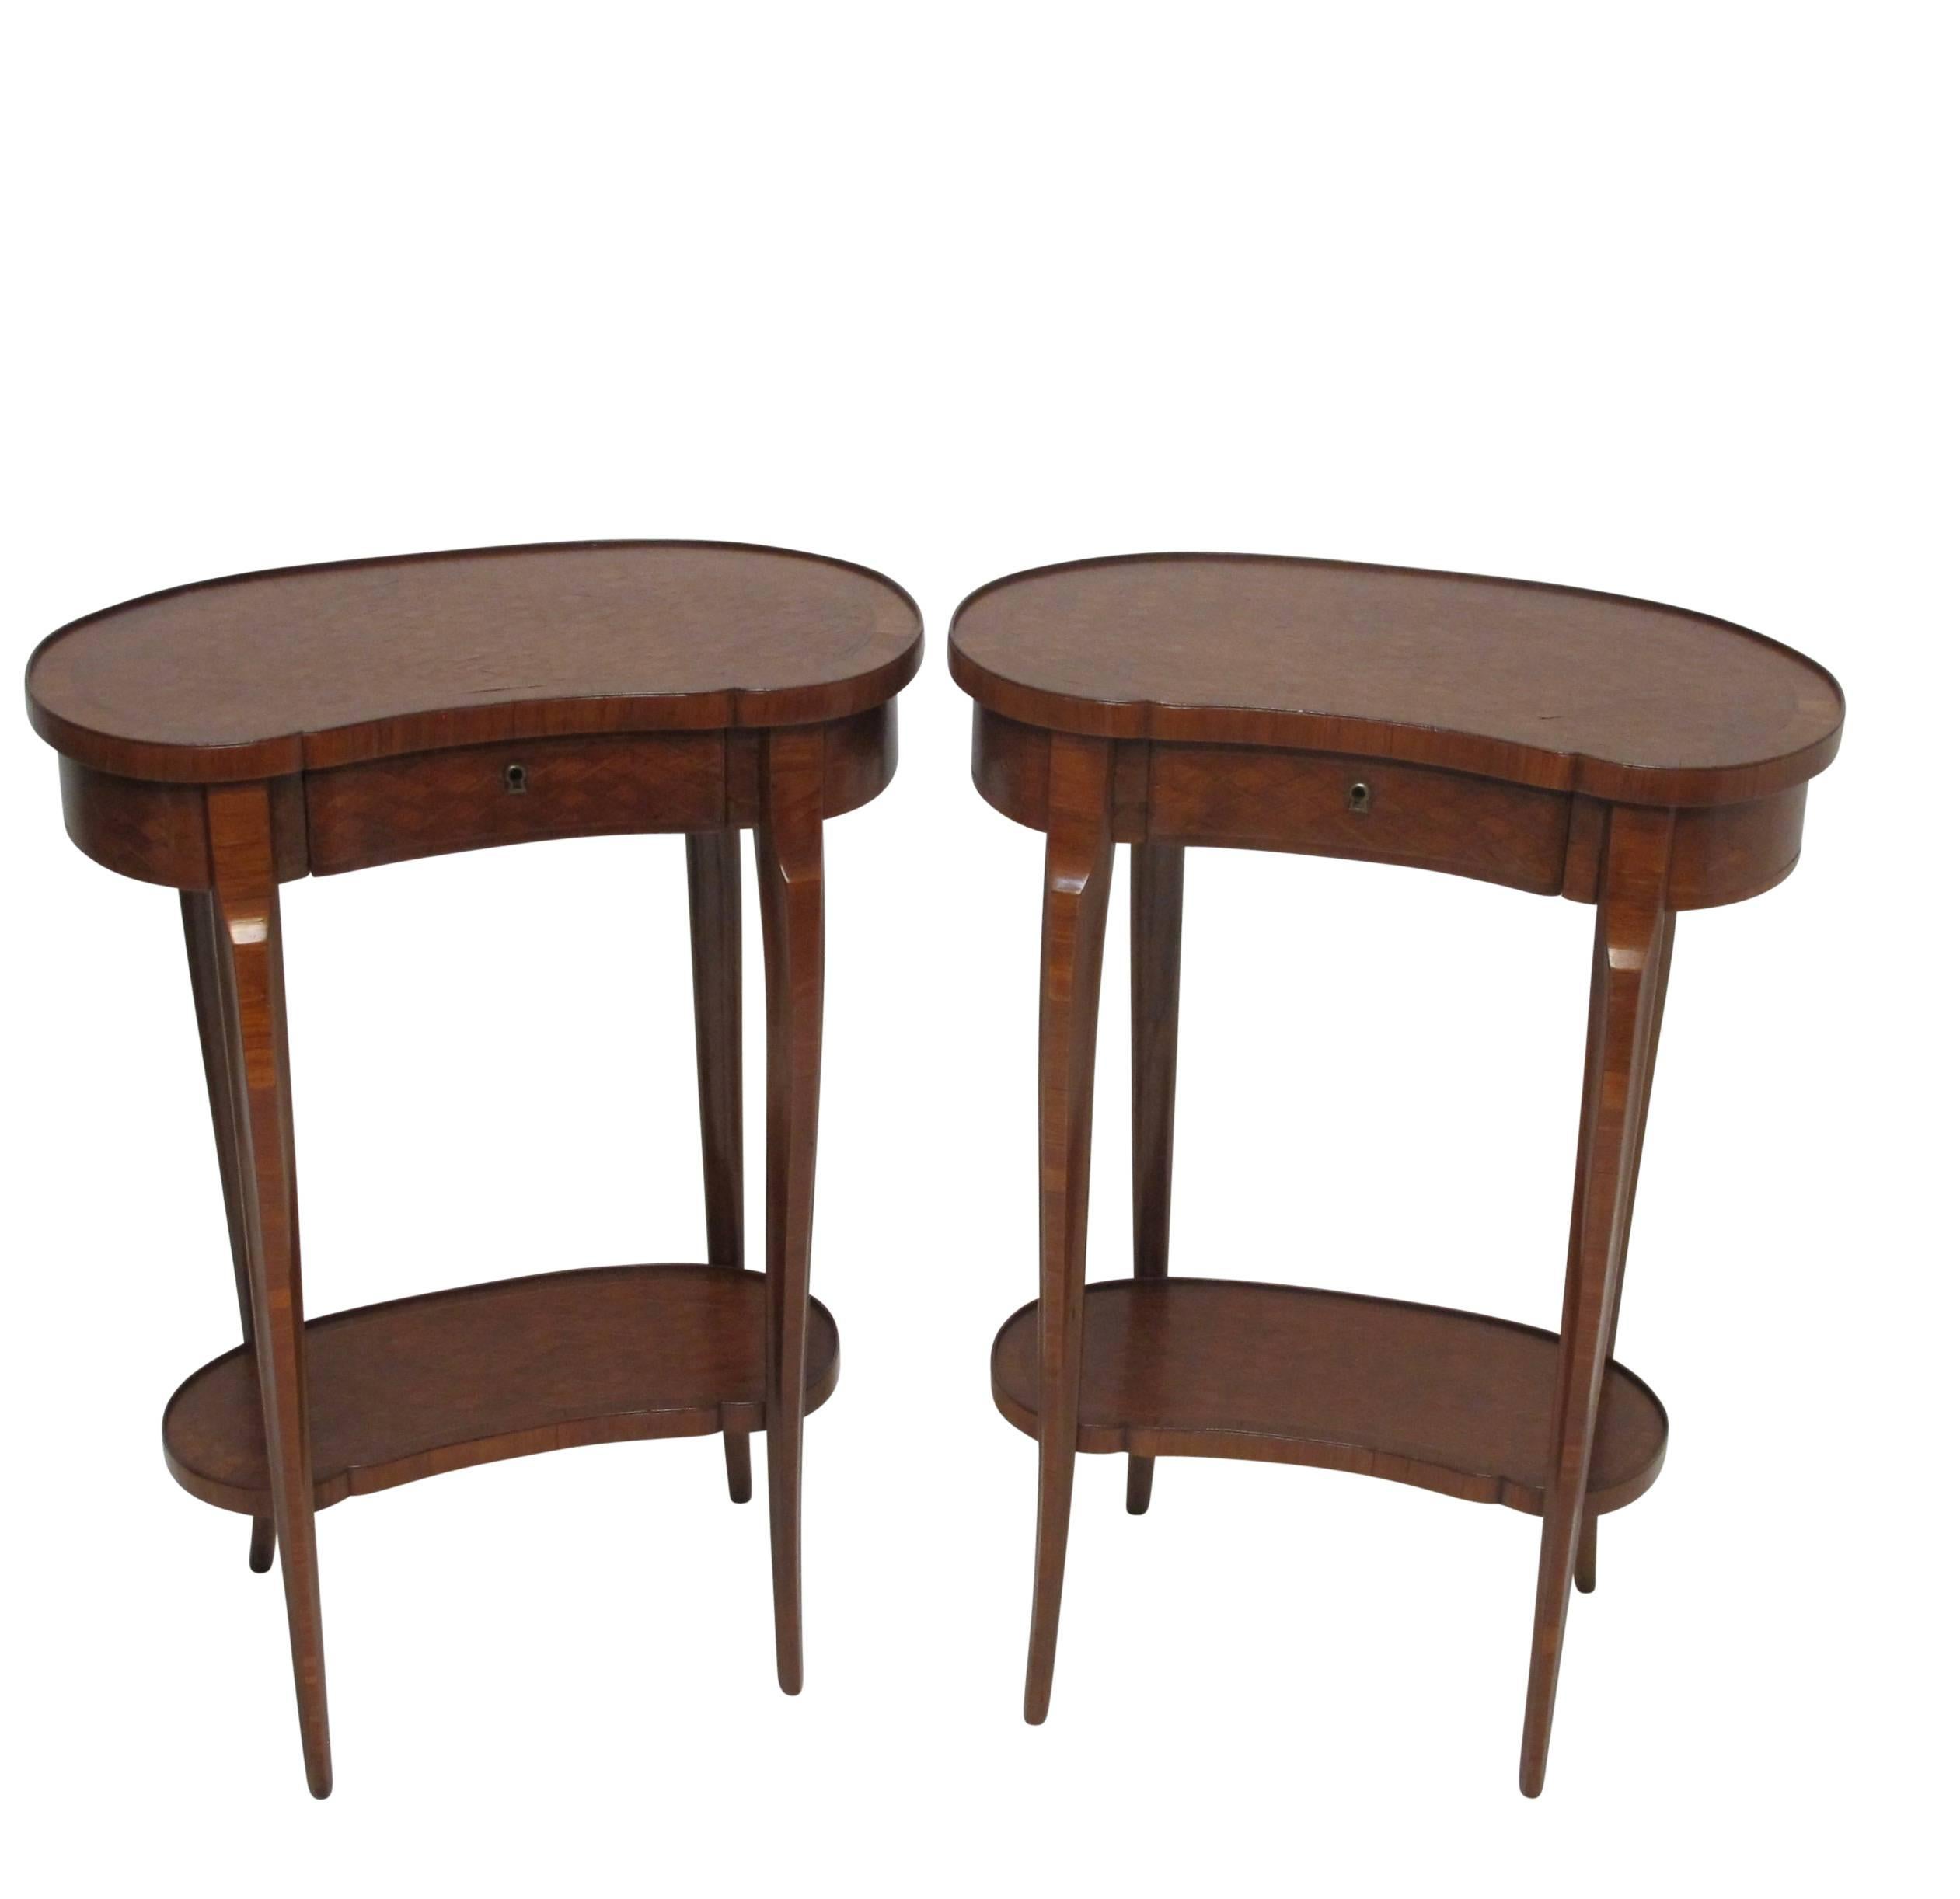 A pair of charming mahogany side tables with inlaid parquetry design, having a single drawer, a lower shelf, and standing on cabriole legs. France, circa 1900.